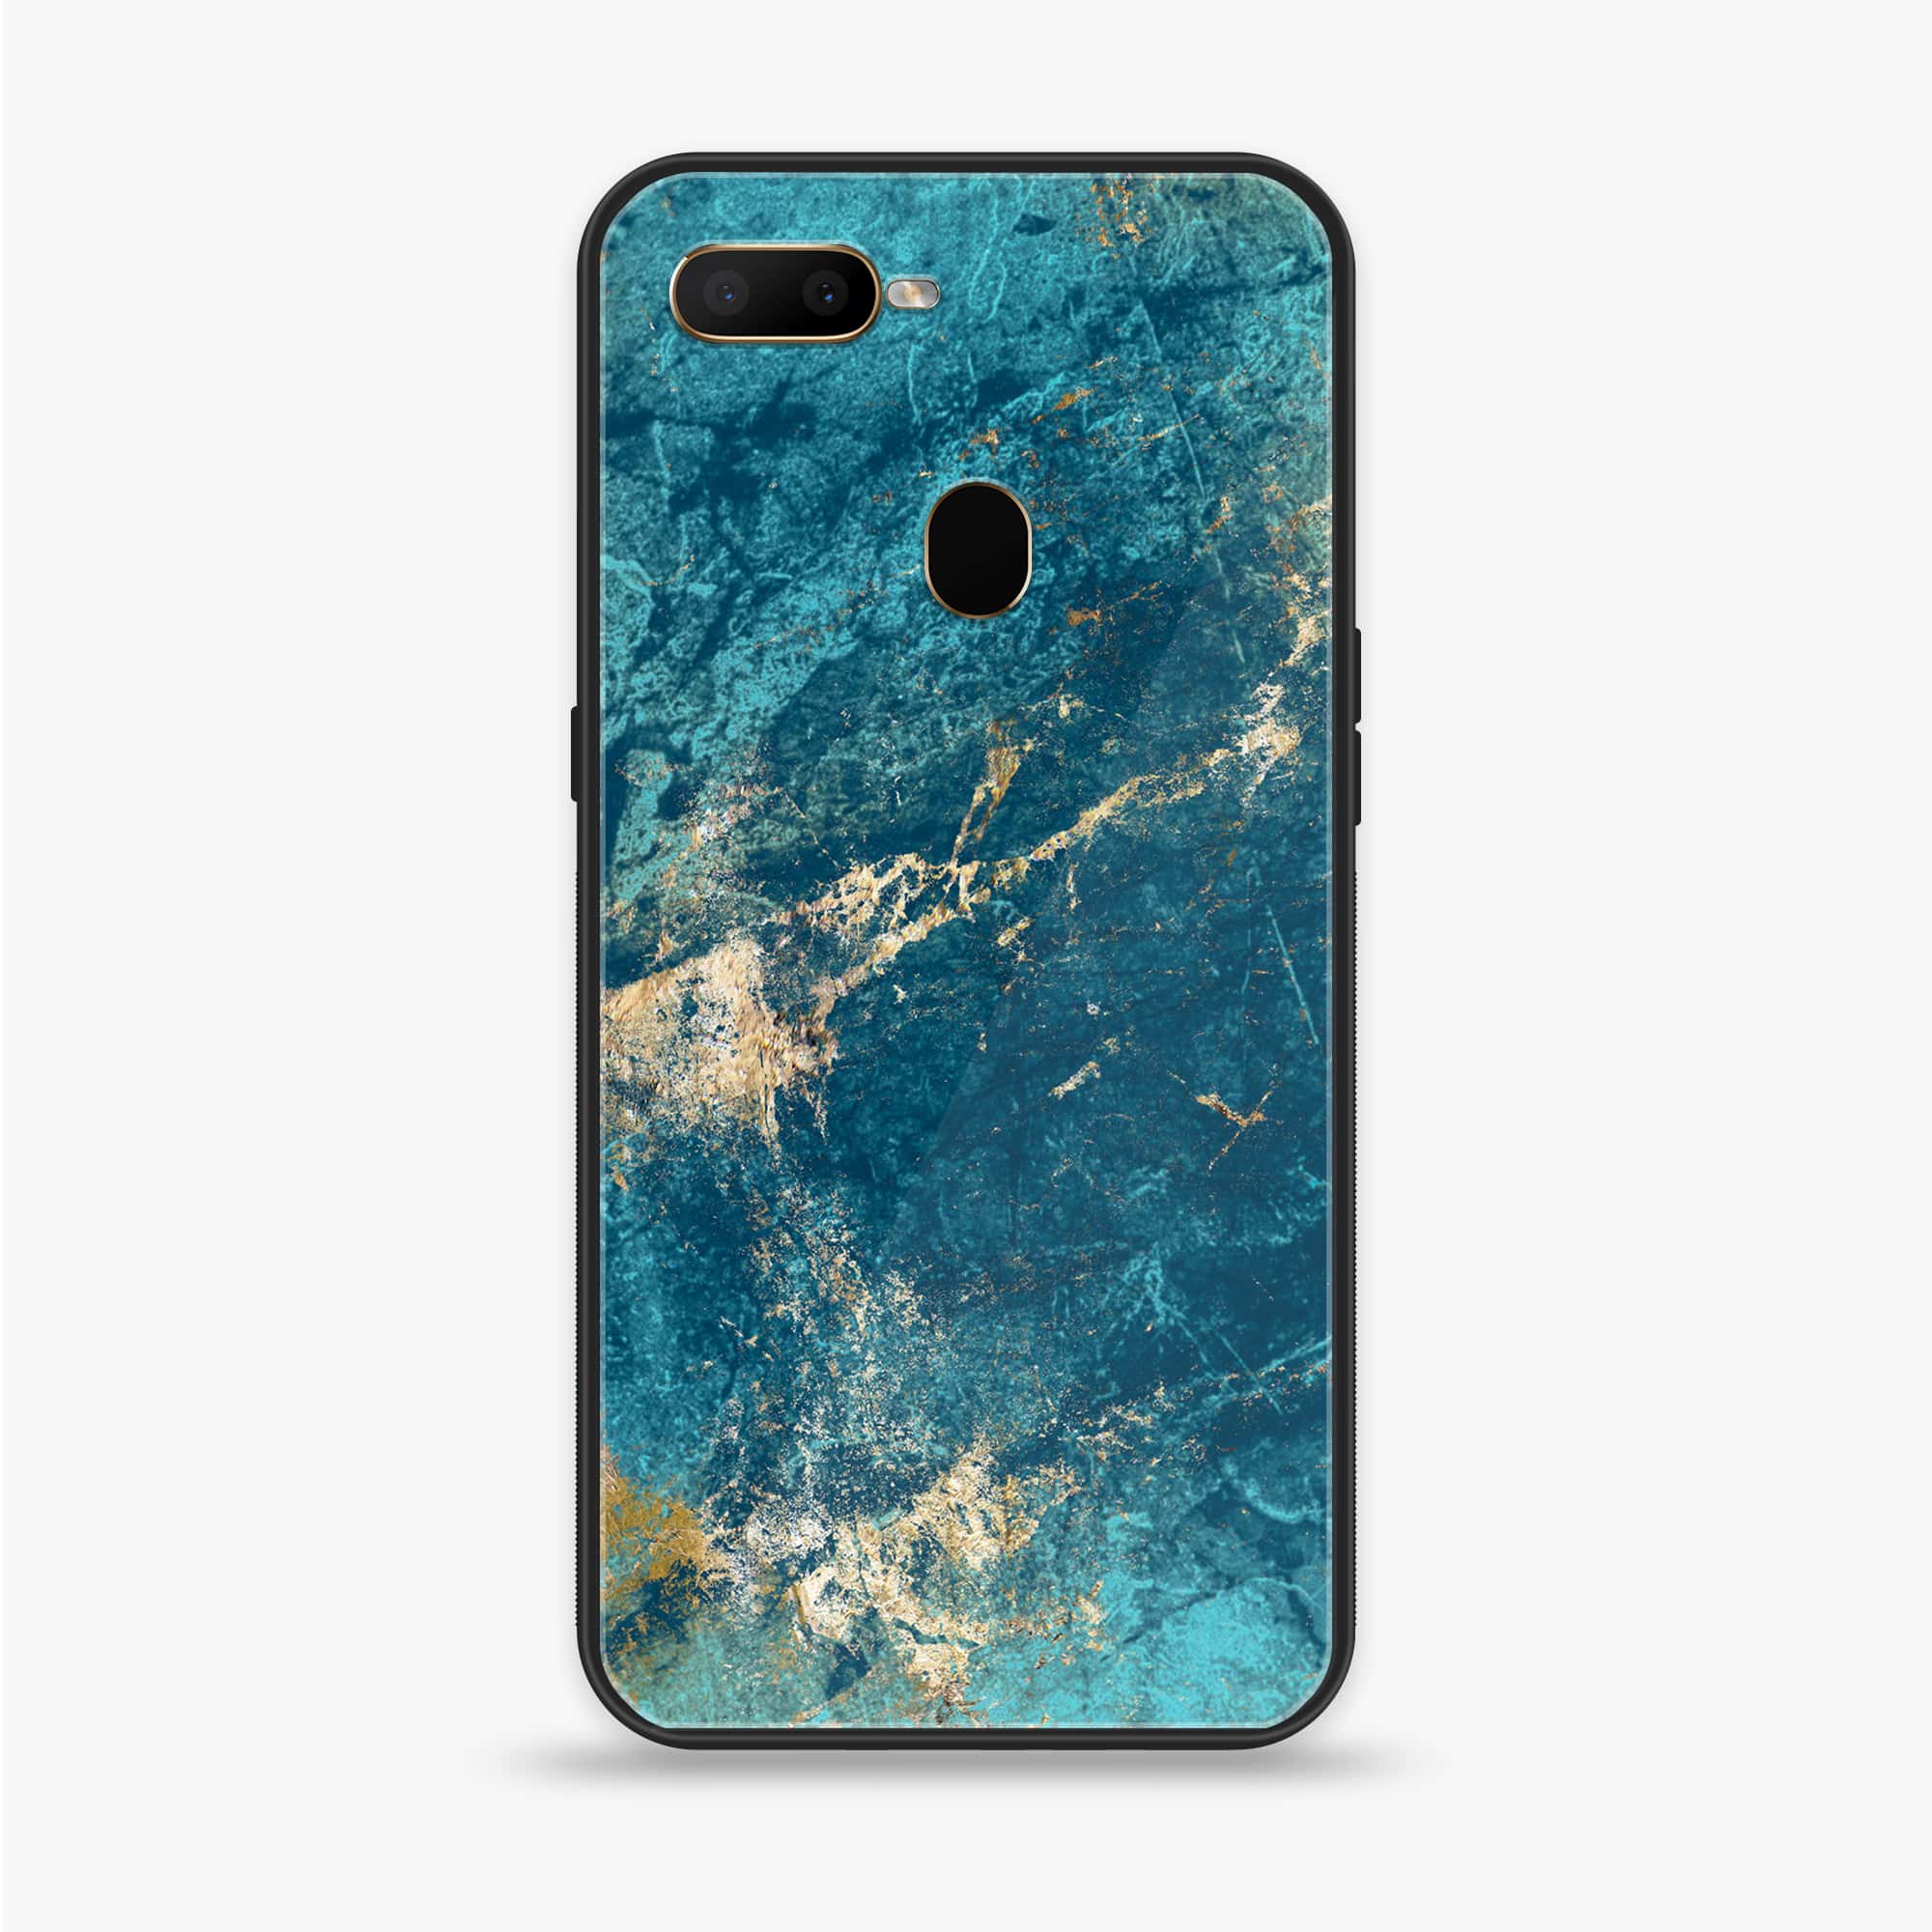 OPPO A5s - Blue Marble Series V 2.0 - Premium Printed Glass soft Bumper shock Proof Case